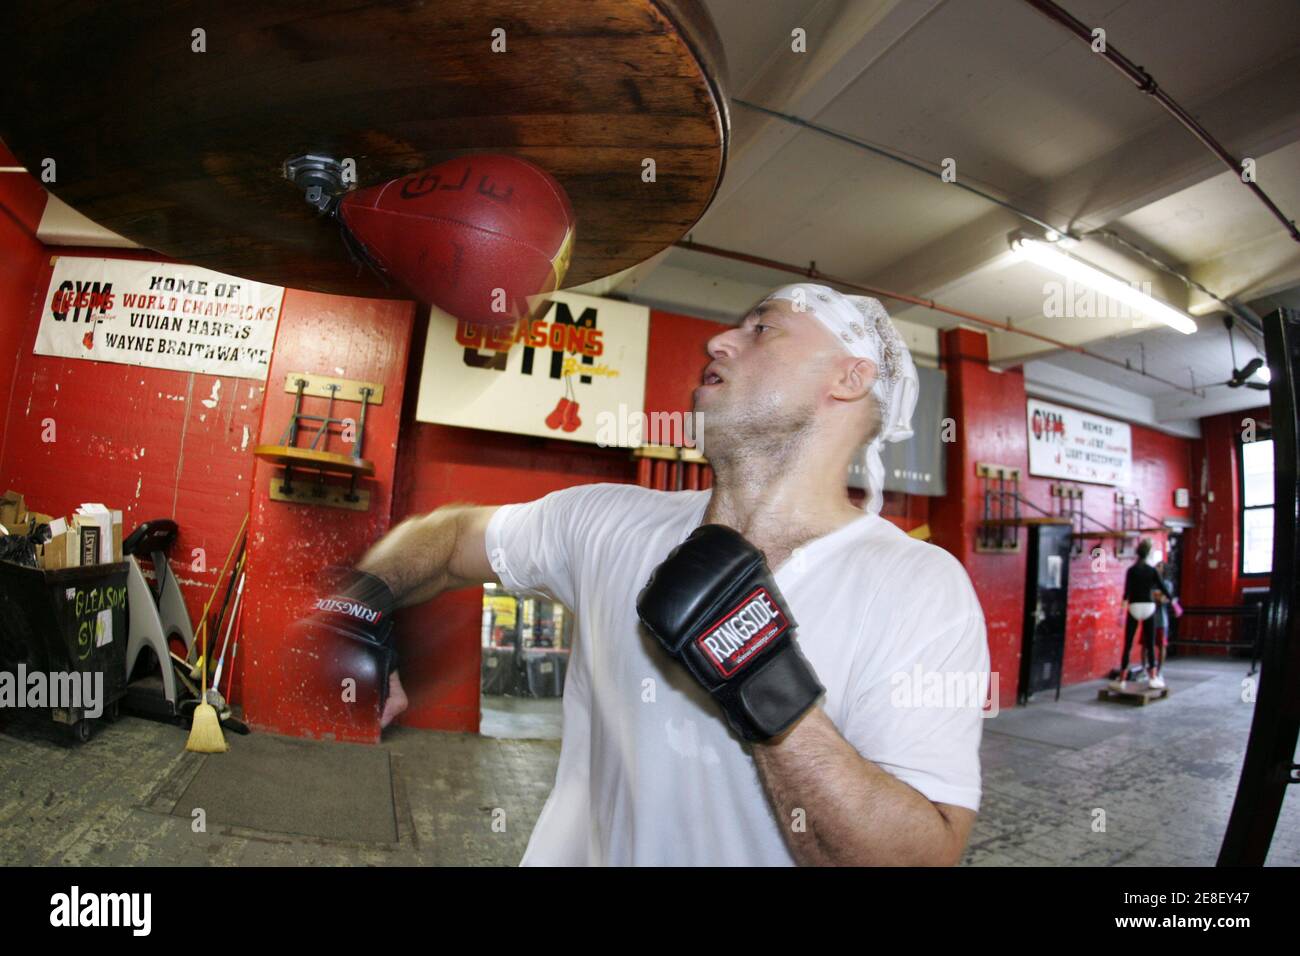 A boxer punches a speed bag during training at Gleason's boxing gym in  Brooklyn, New York October 28, 2009. Muhammad Ali, Mike Tyson, Roberto  Duran and Jake LaMotta are just a sample